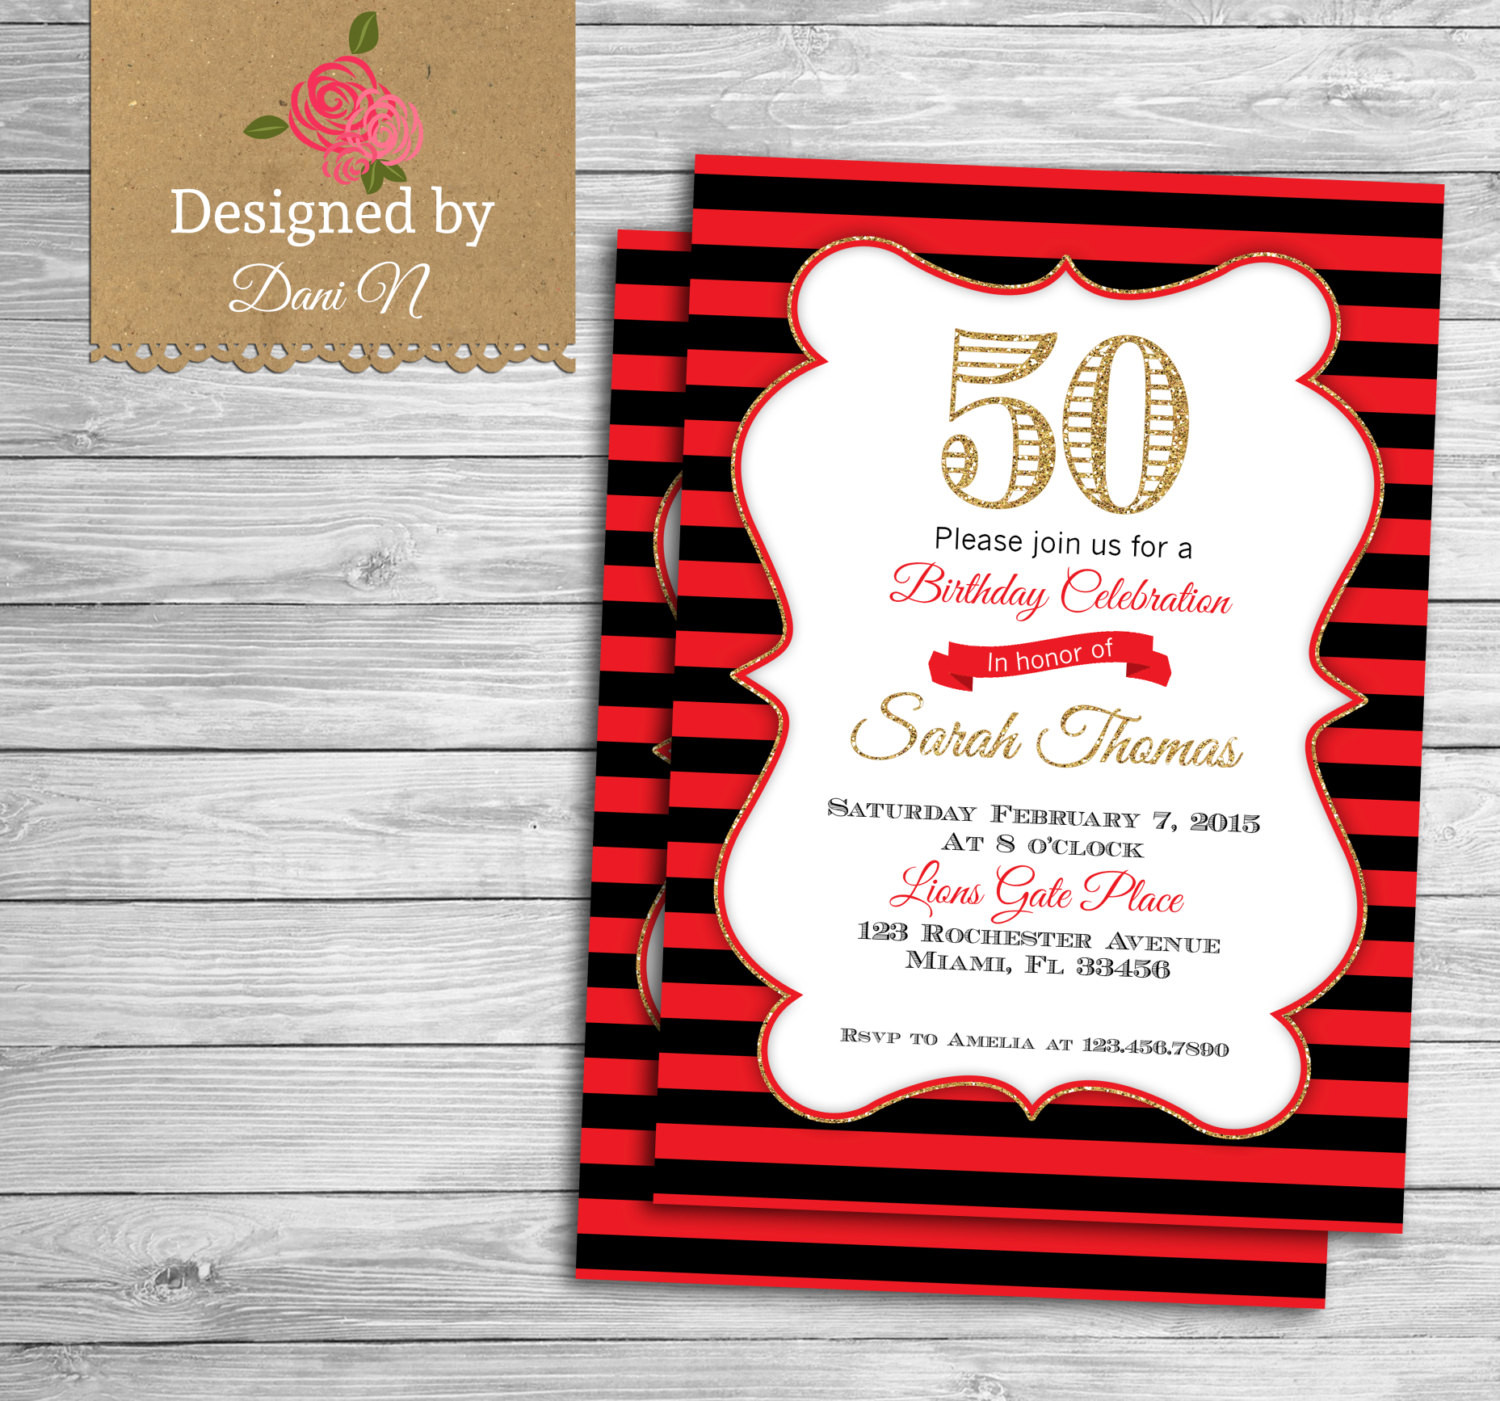 Adult Birthday Party Invitations
 Adult Birthday INVITATION 50th birthday invite adult party